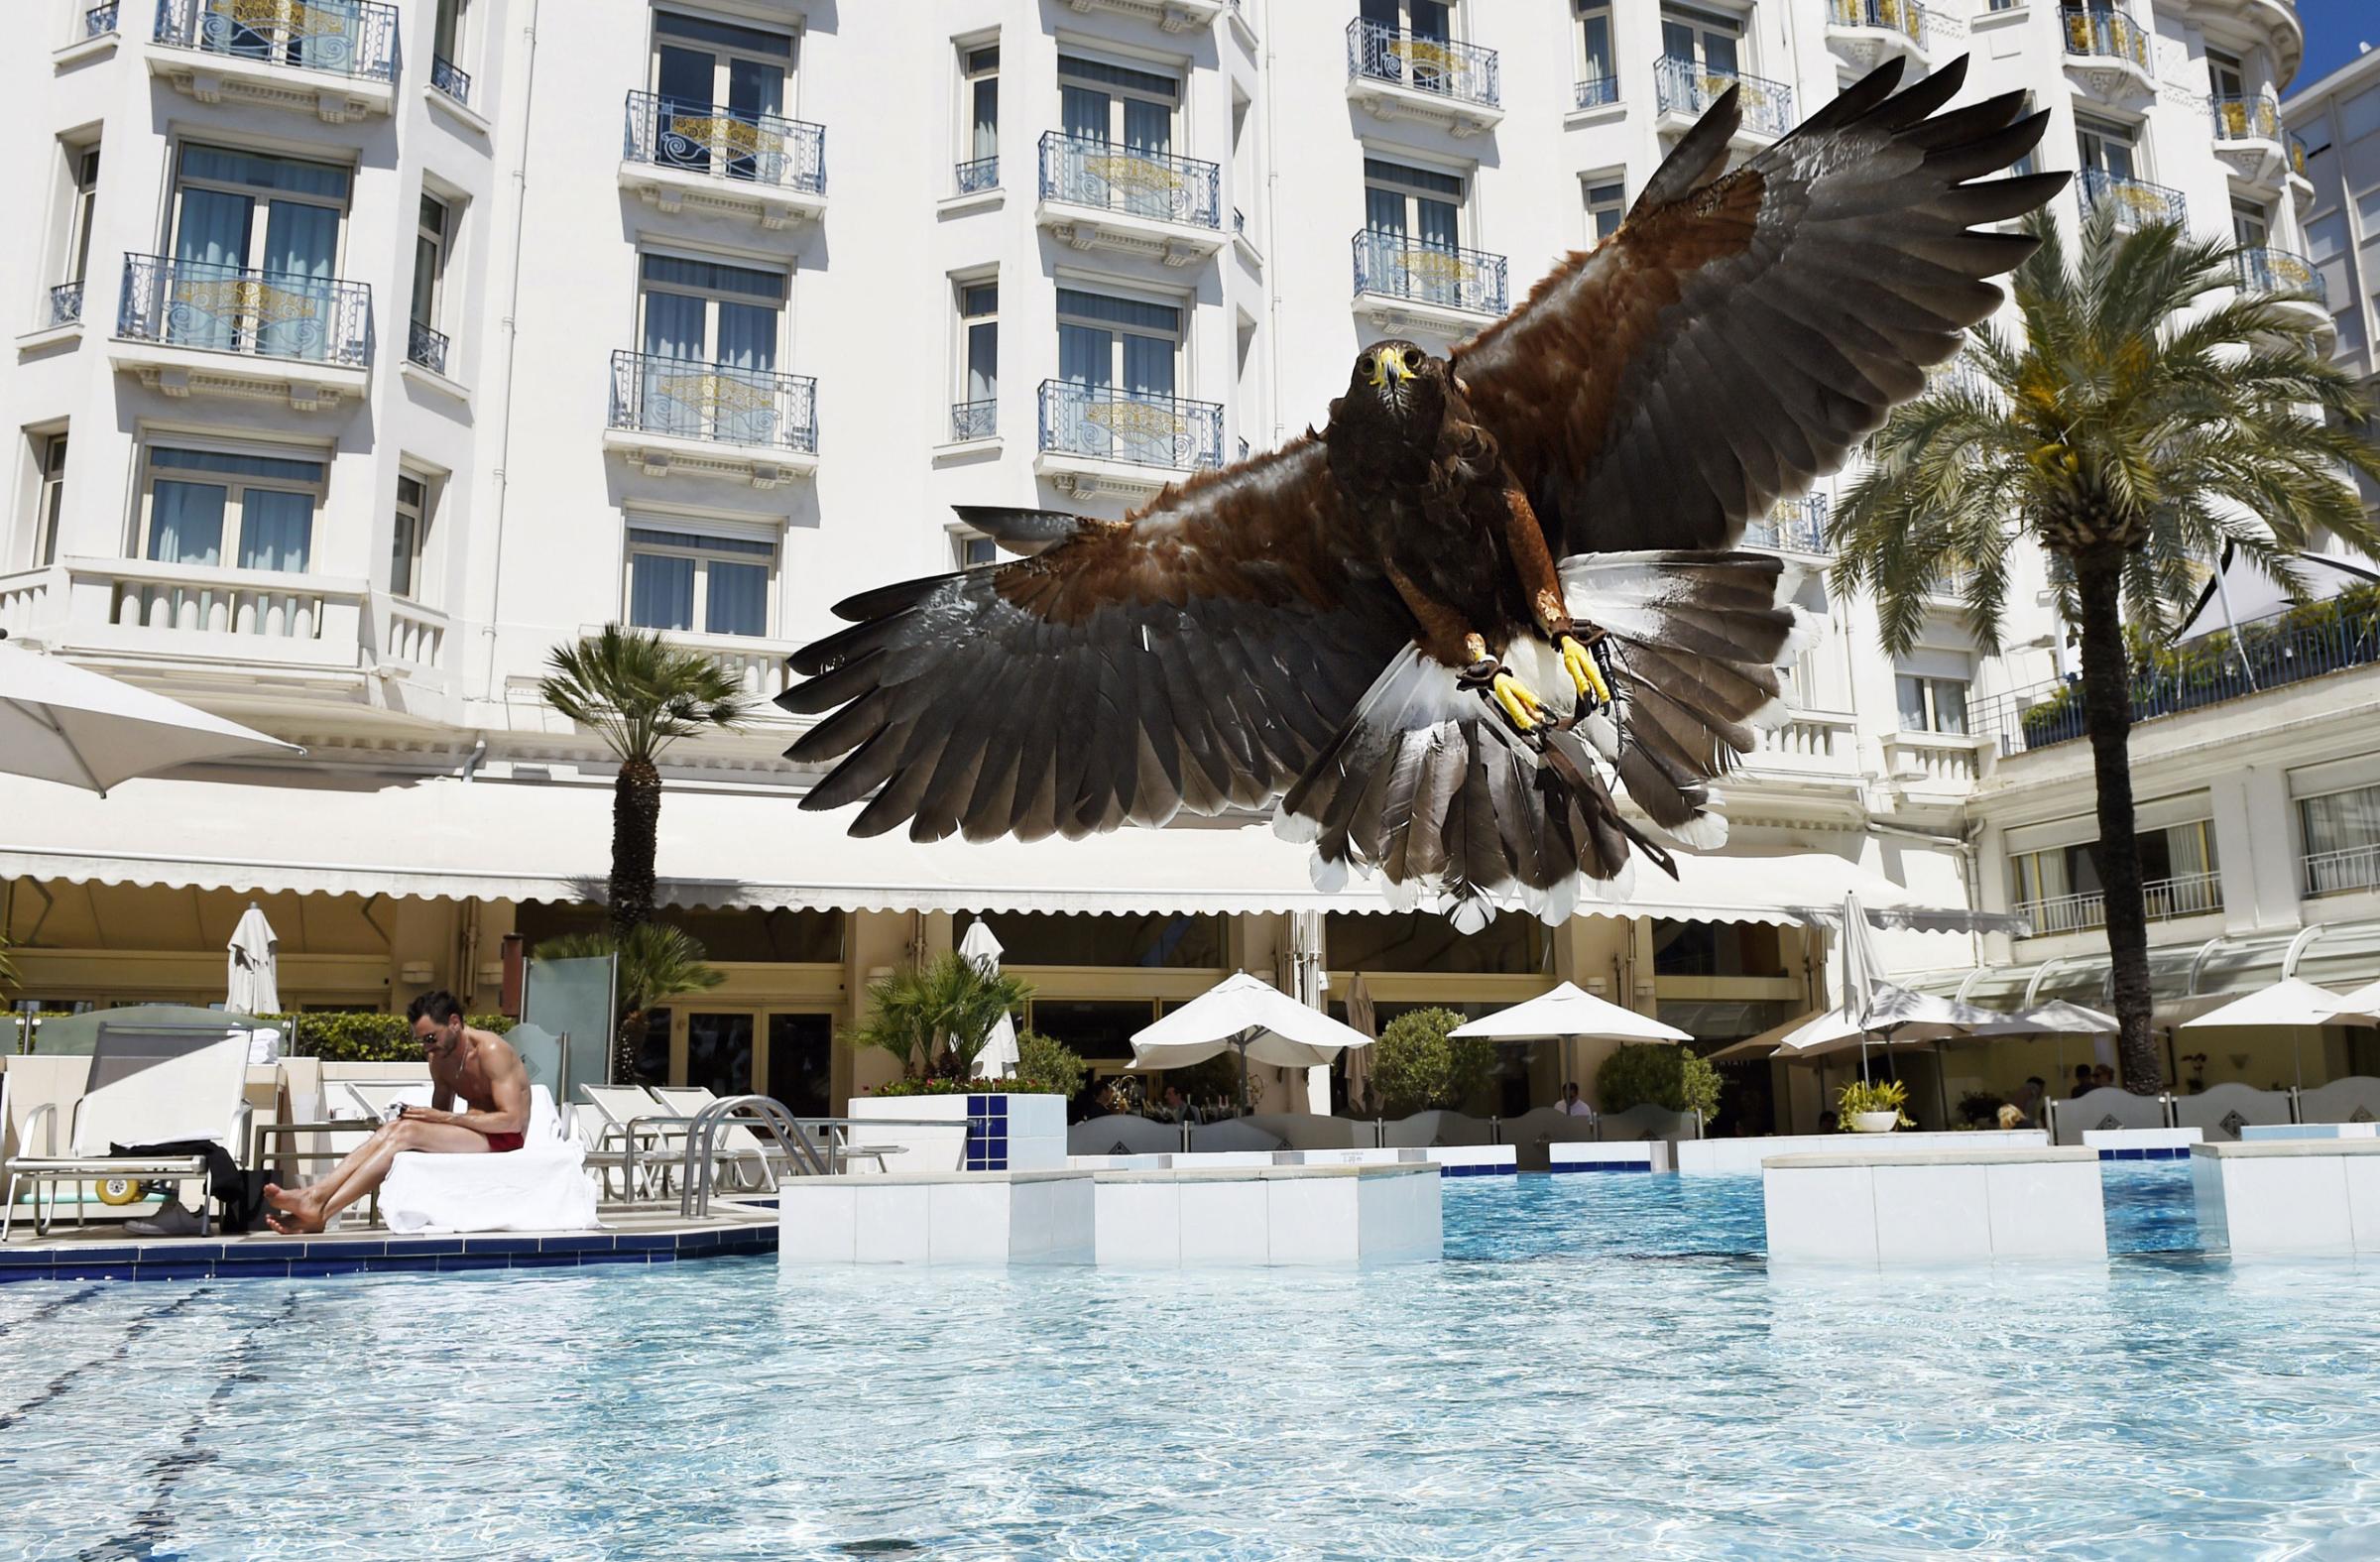 A hawk flies over the swimming pool of the Grand Hyatt Cannes Hotel Martinez during the 68th Cannes Film Festival in Cannes, southeastern France, May 20, 2015.